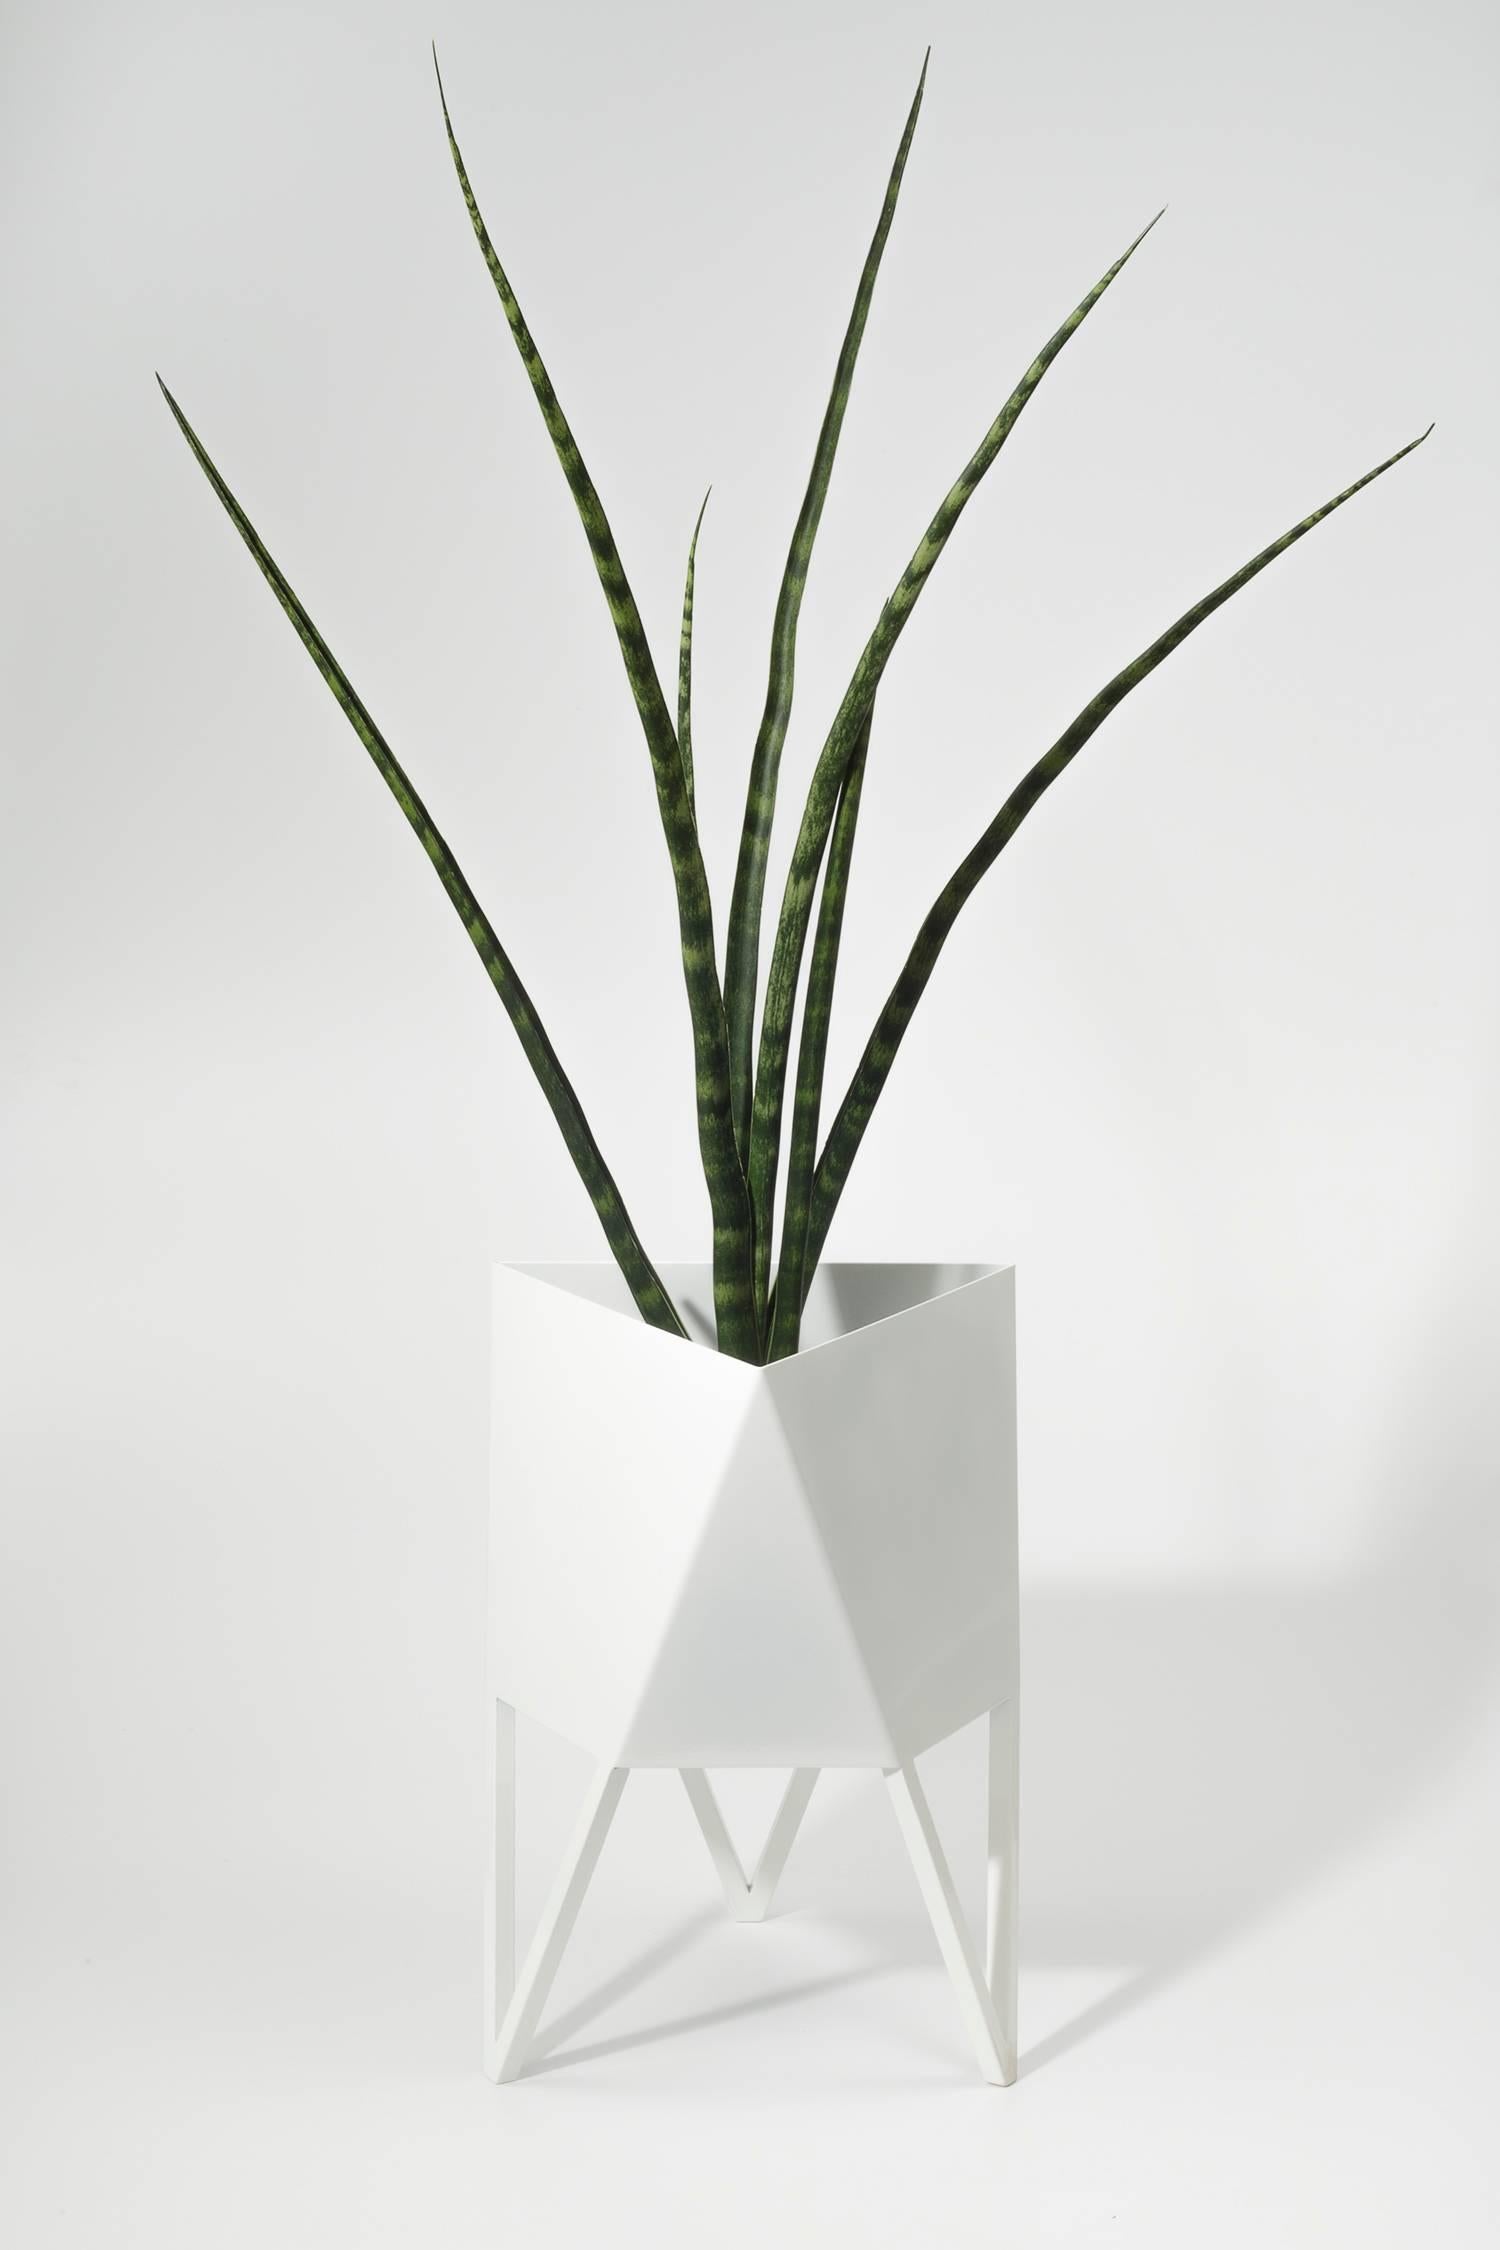 Contemporary Deca Planter in Living Coral Steel, Large, by Force/Collide